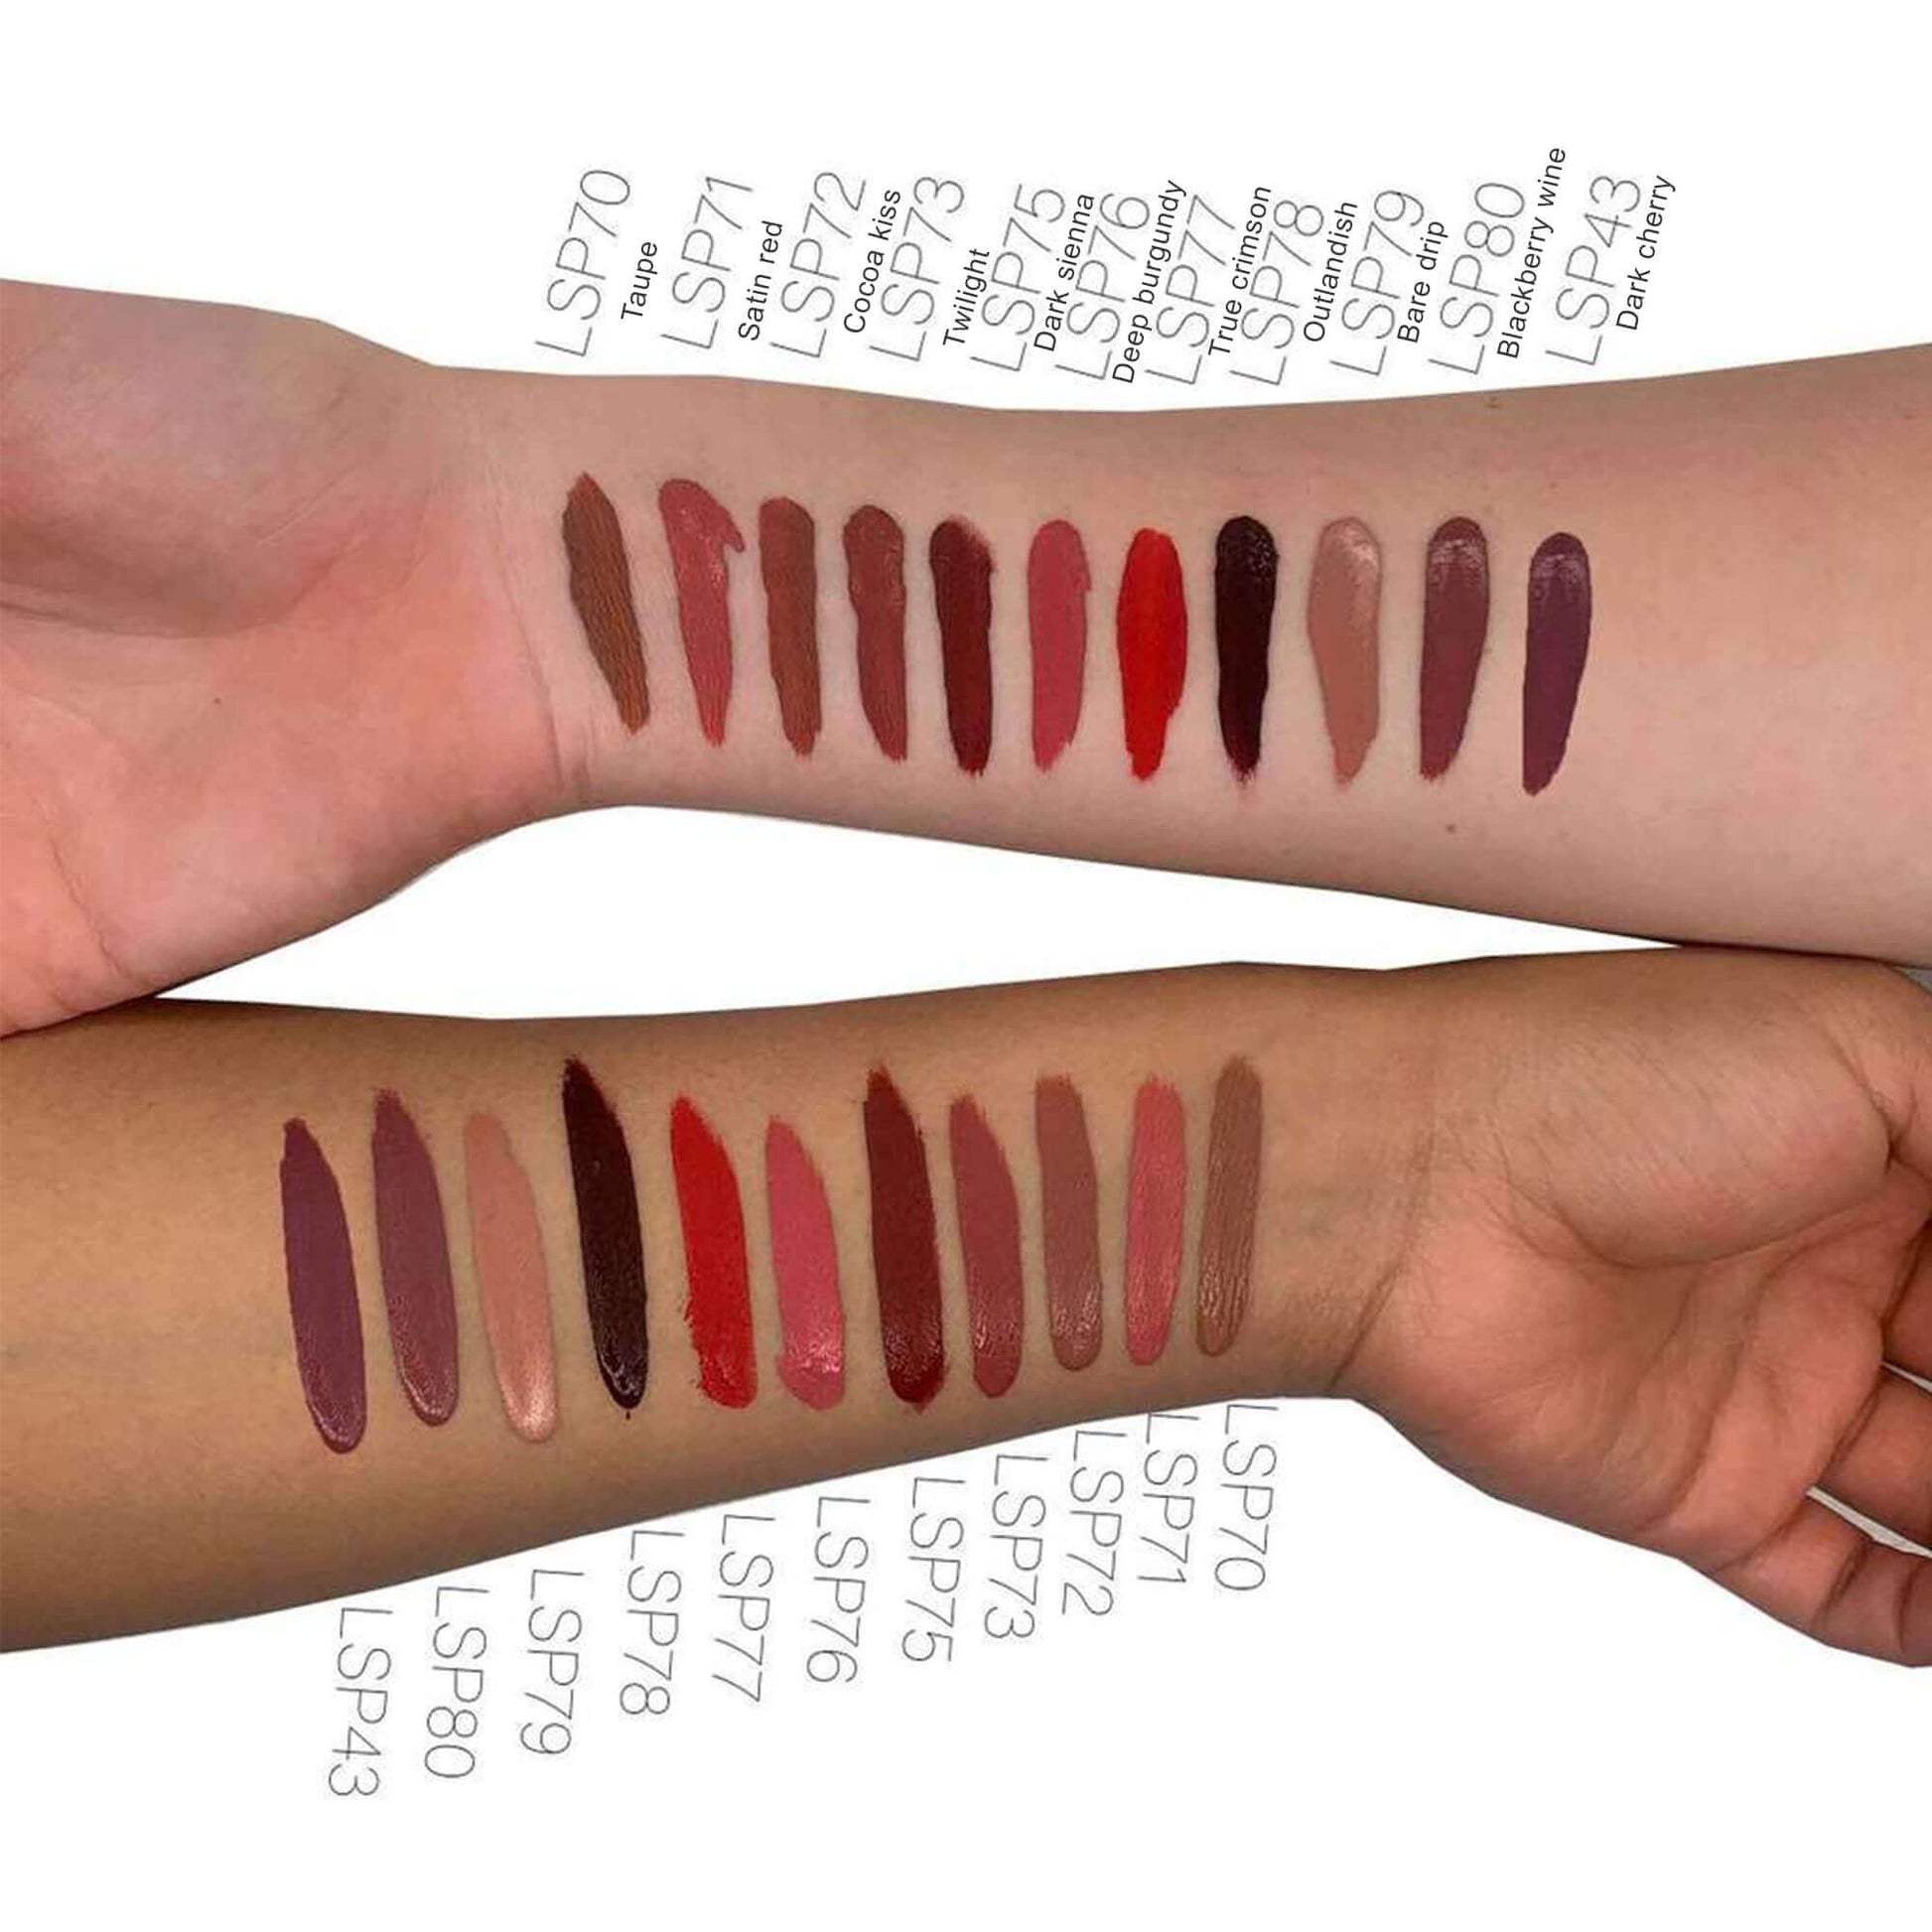 Twilight Matte Lip Stain from Cruisin Organics is formulated with vitamin E for a long-lasting, timeless matte finish. Choose from 22 colors..